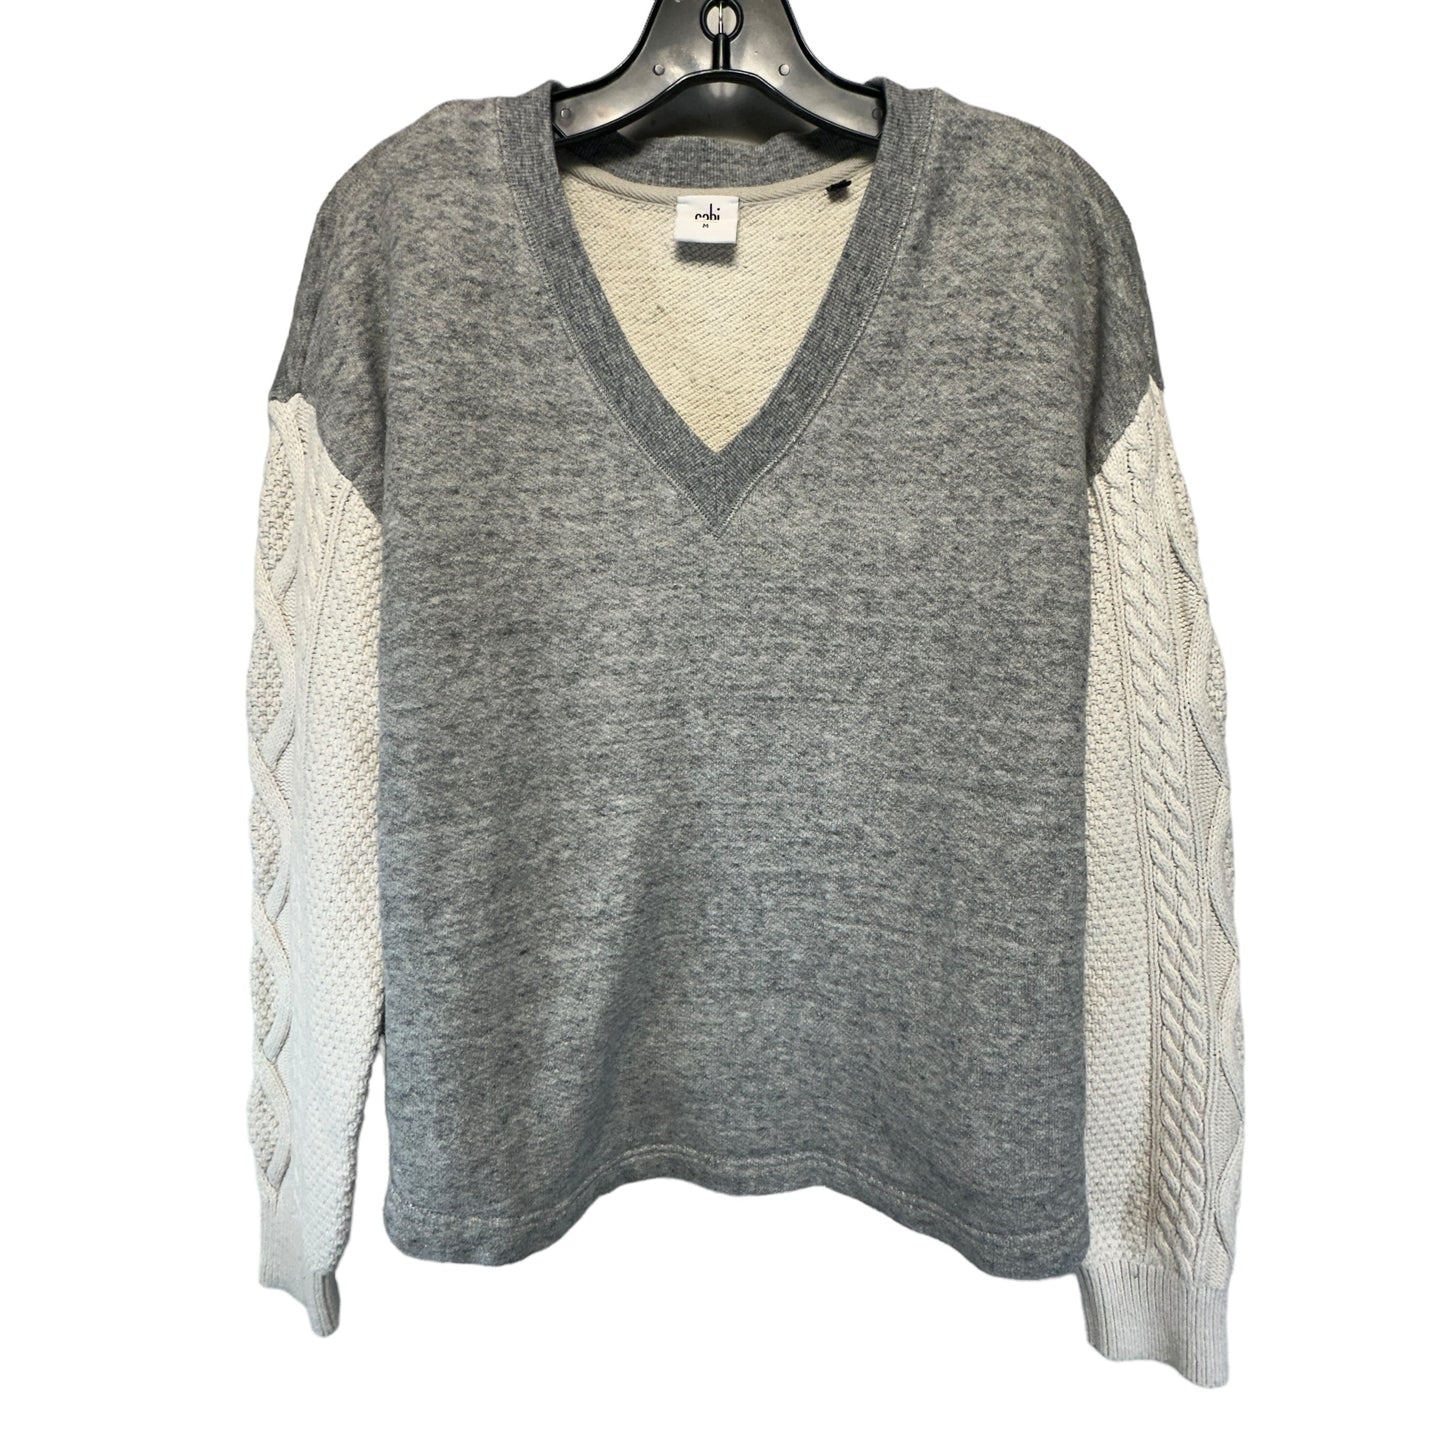 Fusion Cableknit Sweatshirt By Cabi  Size: M